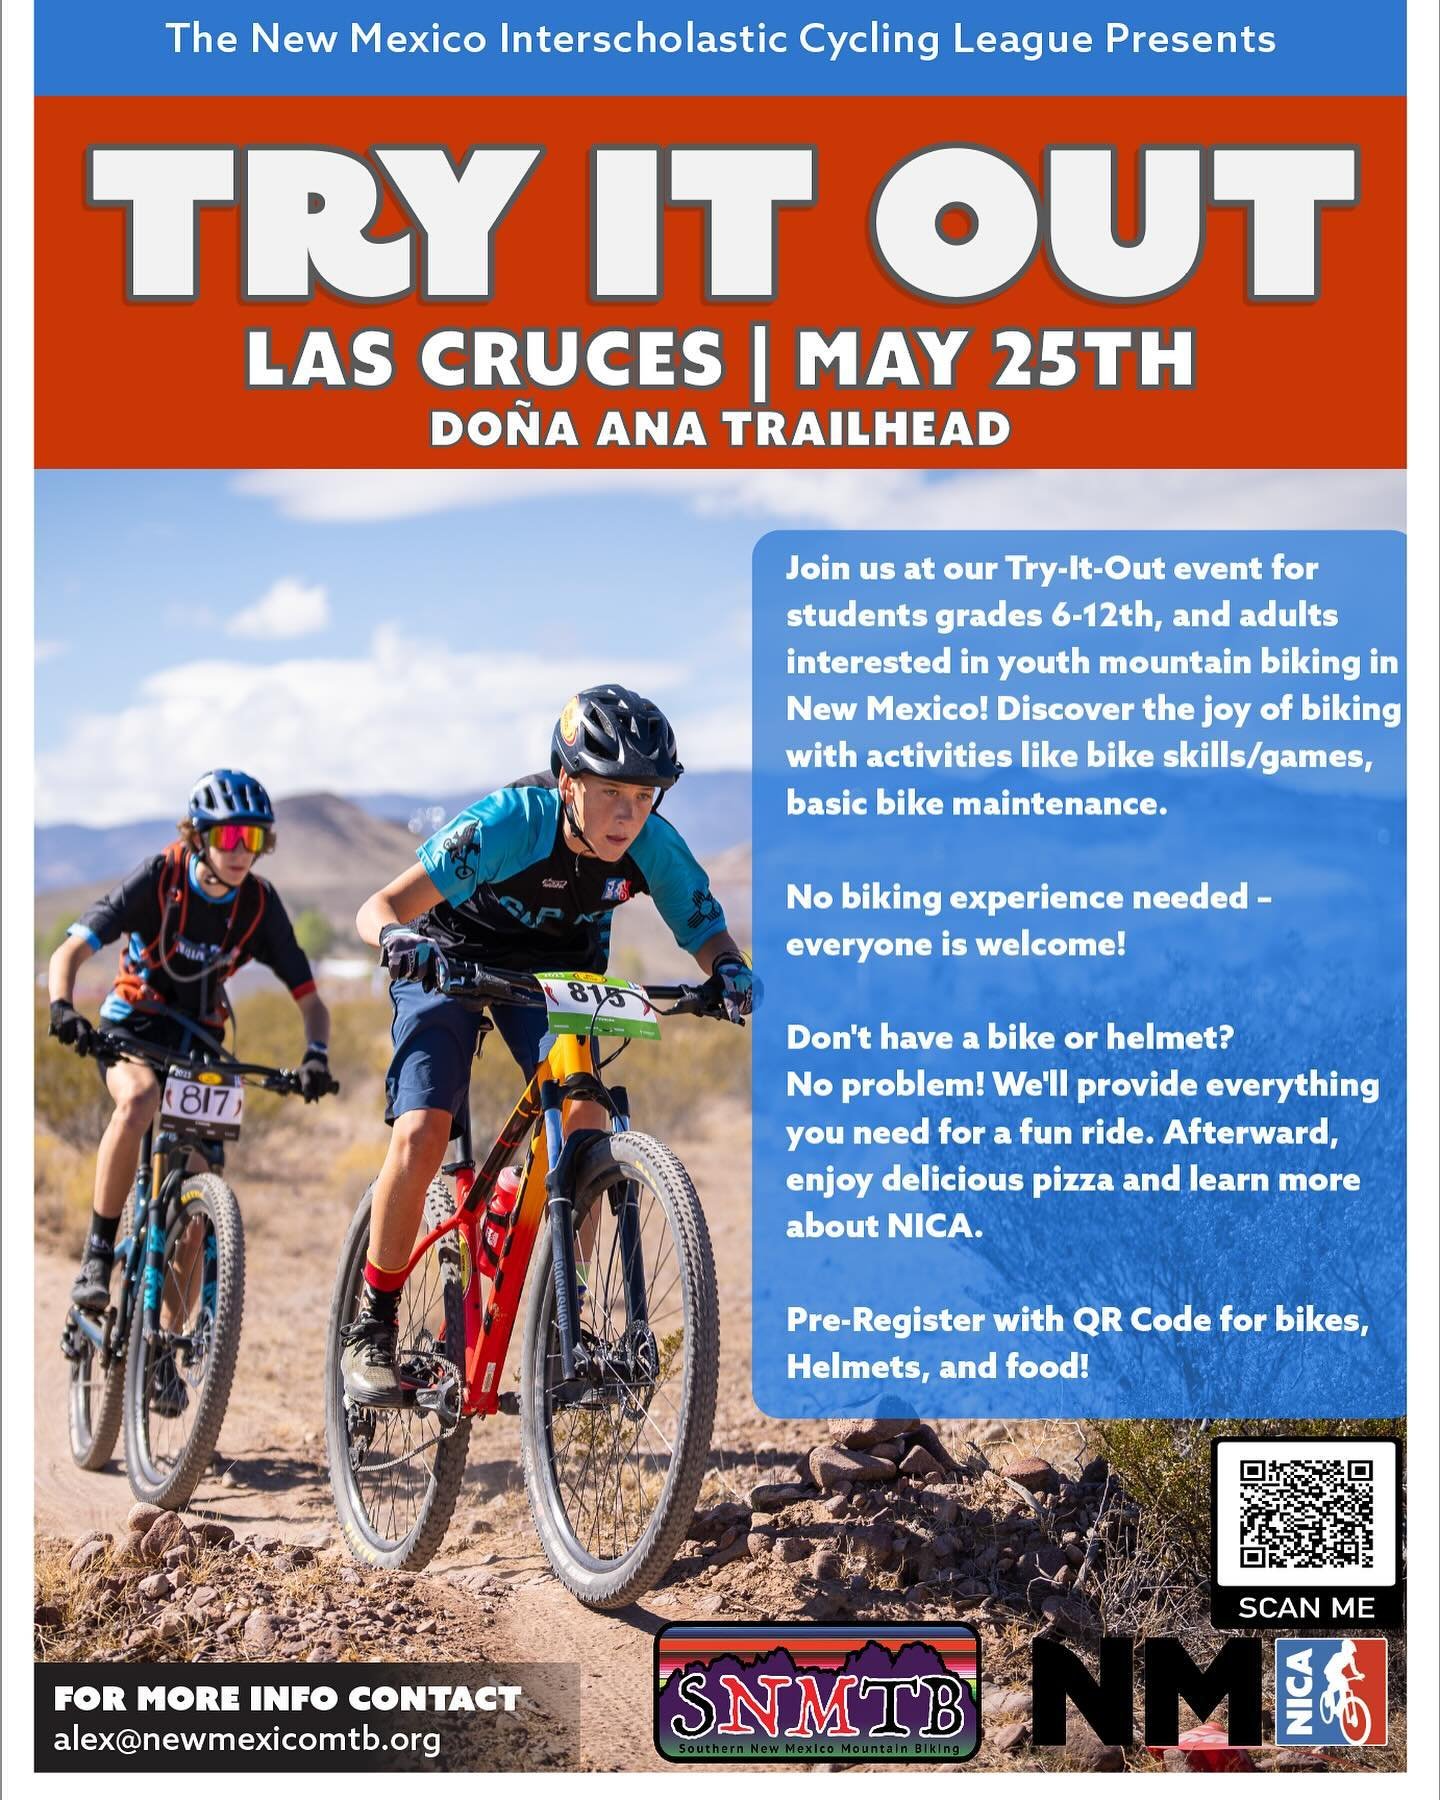 Come on out, May 25 to the Do&ntilde;a Ana trailhead. For middle school and high school aged kids and the parents of. We&rsquo;re helping NICA  bring this event to Las Cruces to help you discover what NICA is all about!  To pre-register scan the QR c